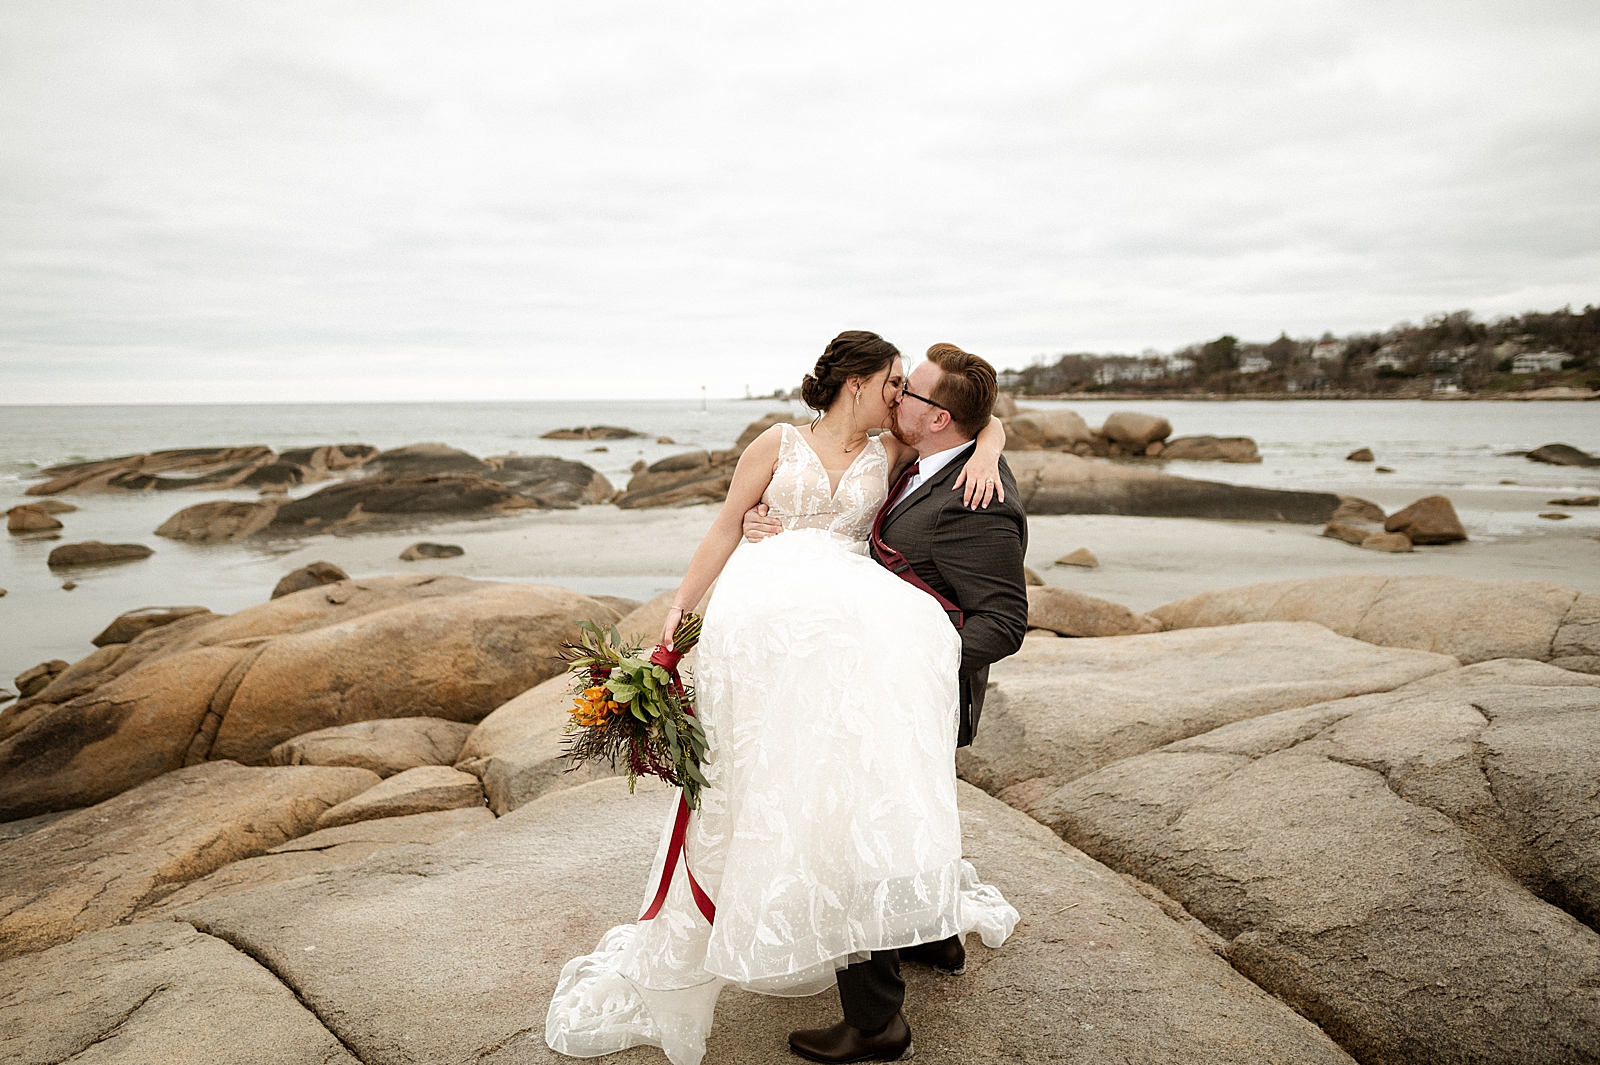 Groom holding Bride and kissing her on the rocky beach